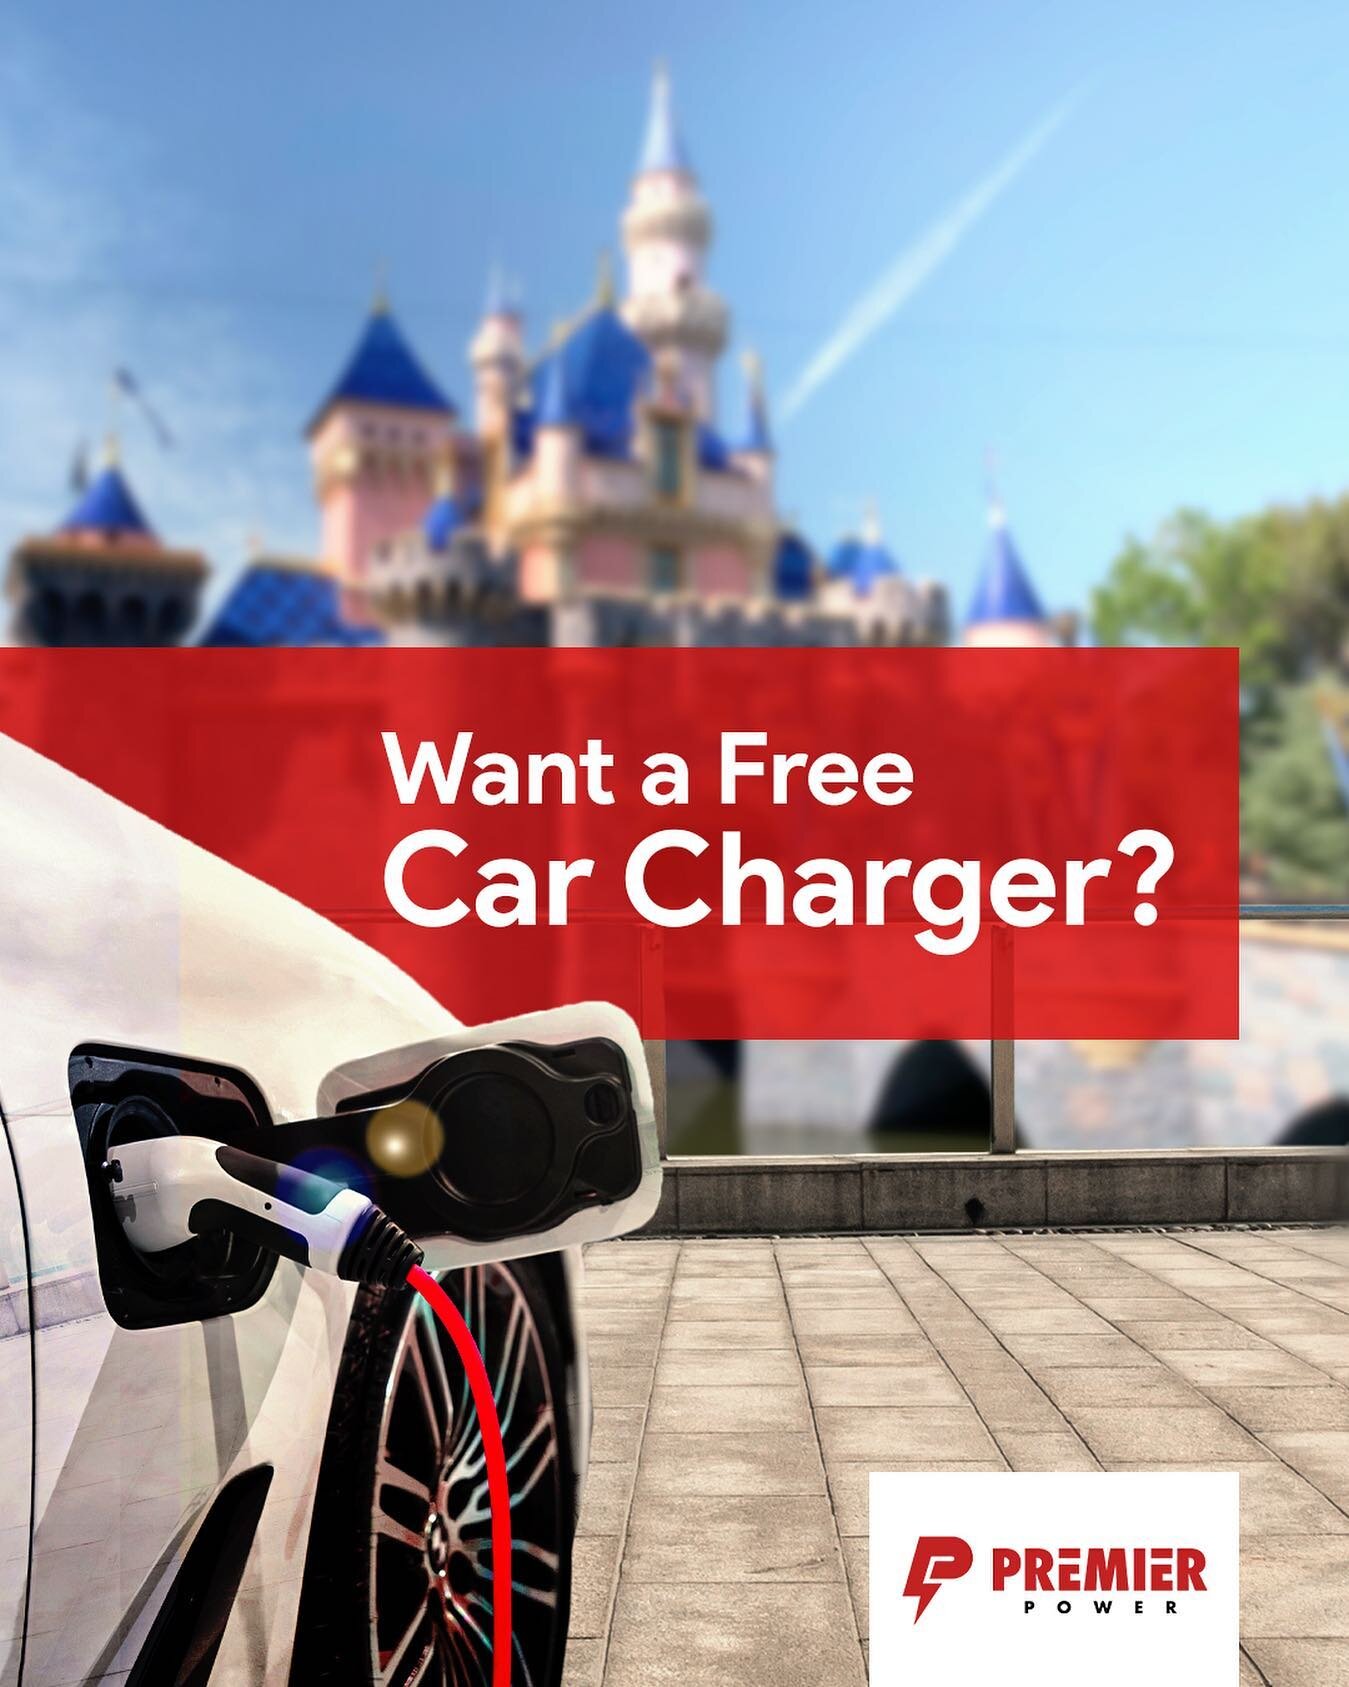 Do you live in Anaheim? Anaheim Public Utilities are offering rebates to customers (both residential/ domestic and business/ non-domestic) who install level 2 plug-in (EV) chargers. Under this program, Anaheim will reimburse customers for out-of-pock